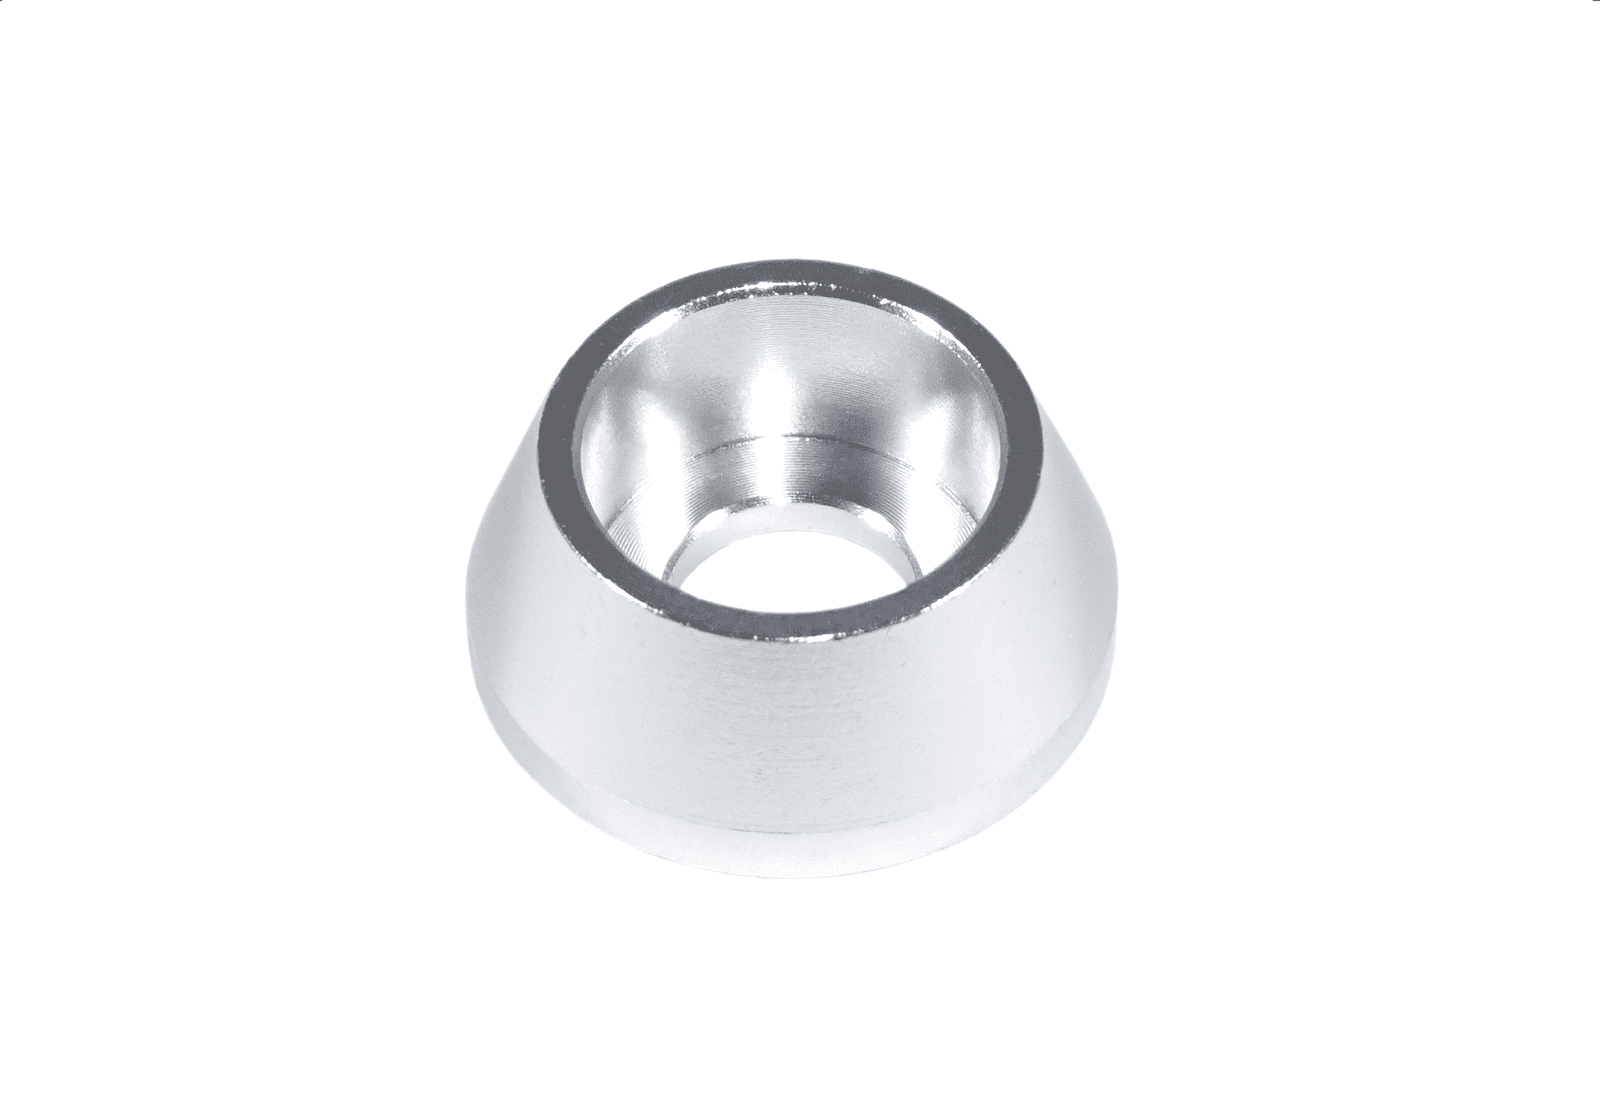 ZSPEC SHSC M5x20mm Bolts w/Angled Finish Washers, Stainless & Billet, Sold as 10-Pack Hardware Fasteners ZSPEC Design LLC.